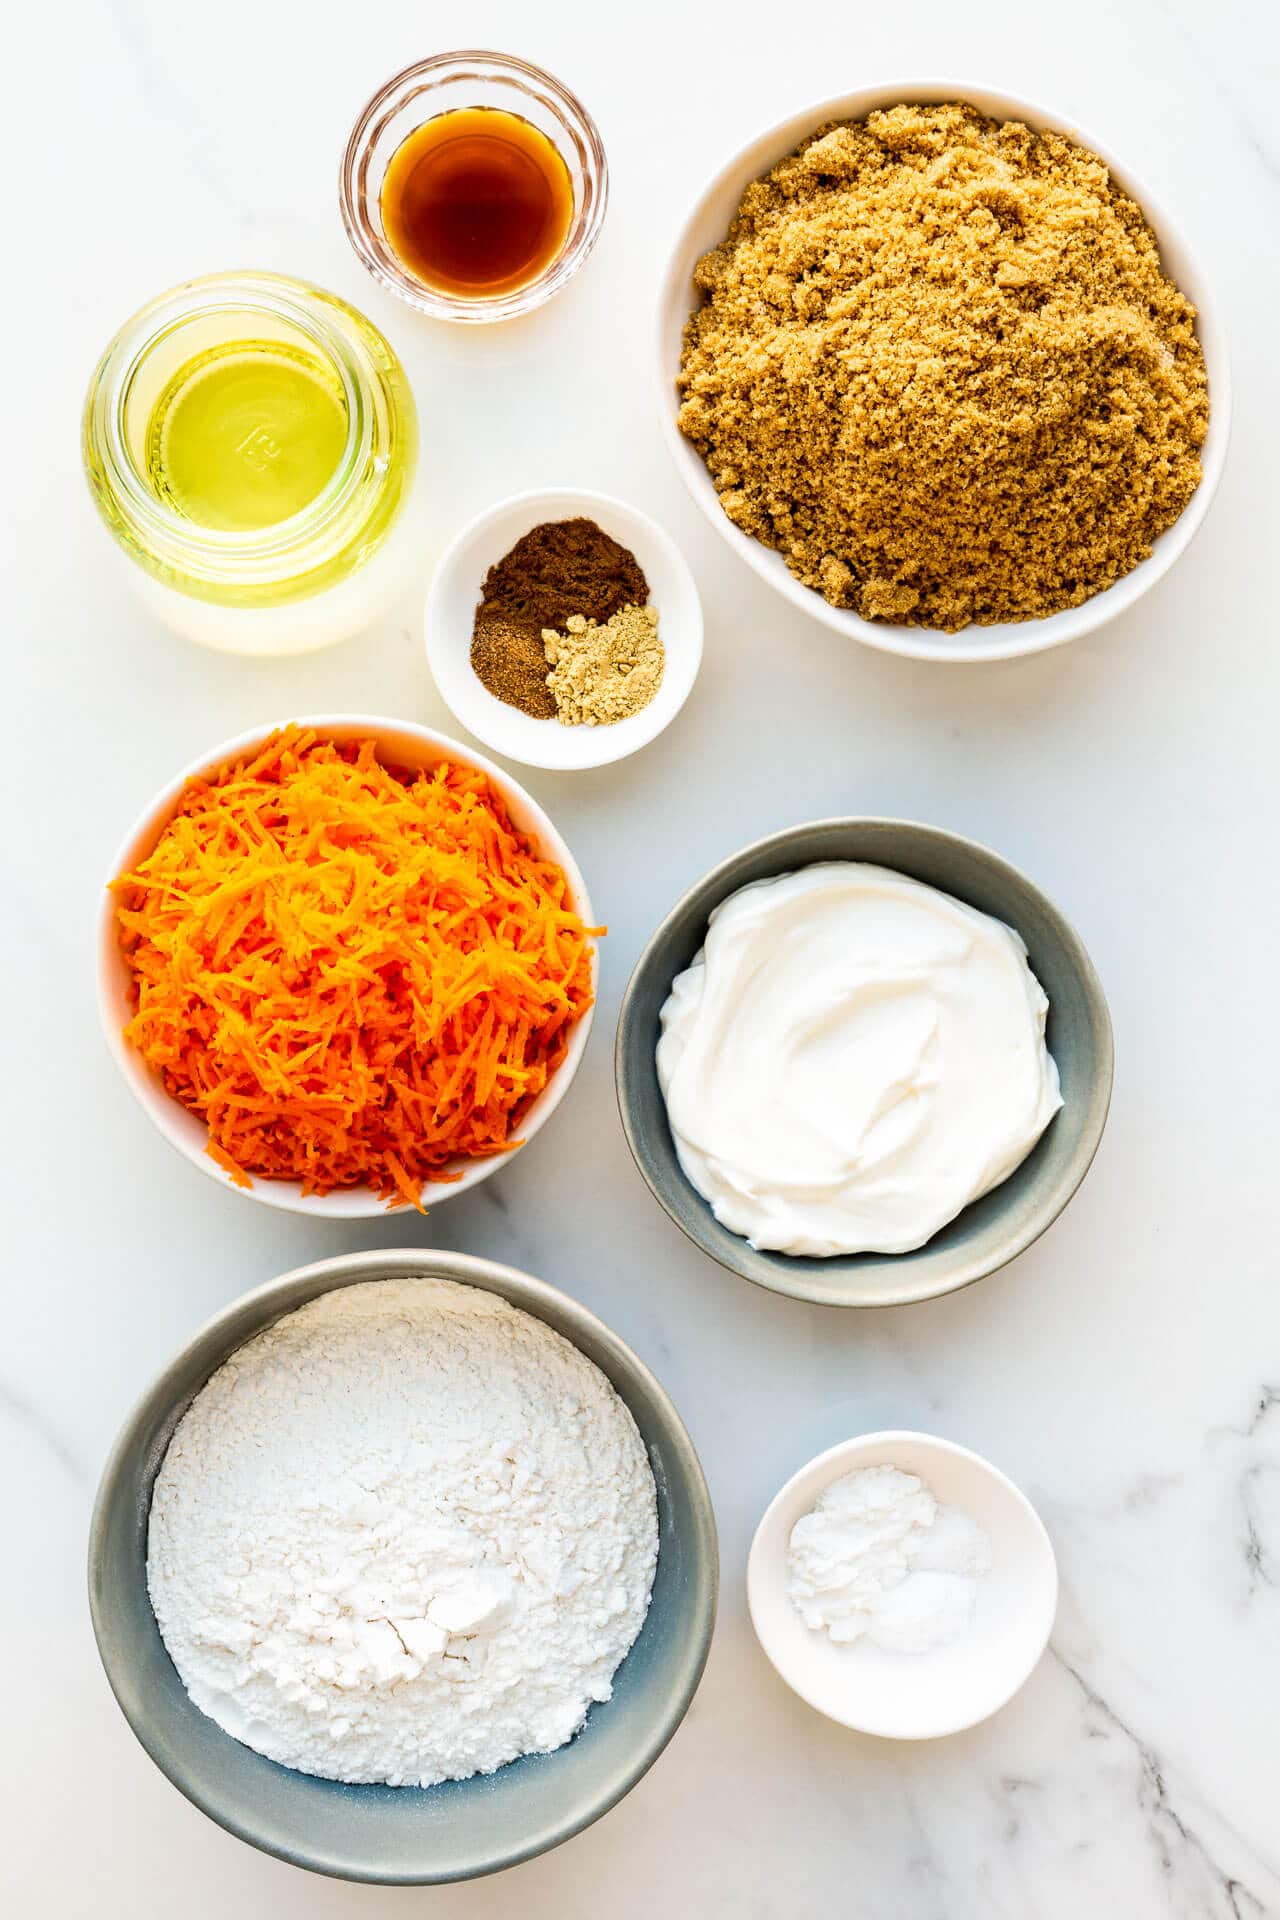 Ingredients to make eggless carrot cake with cream cheese frosting